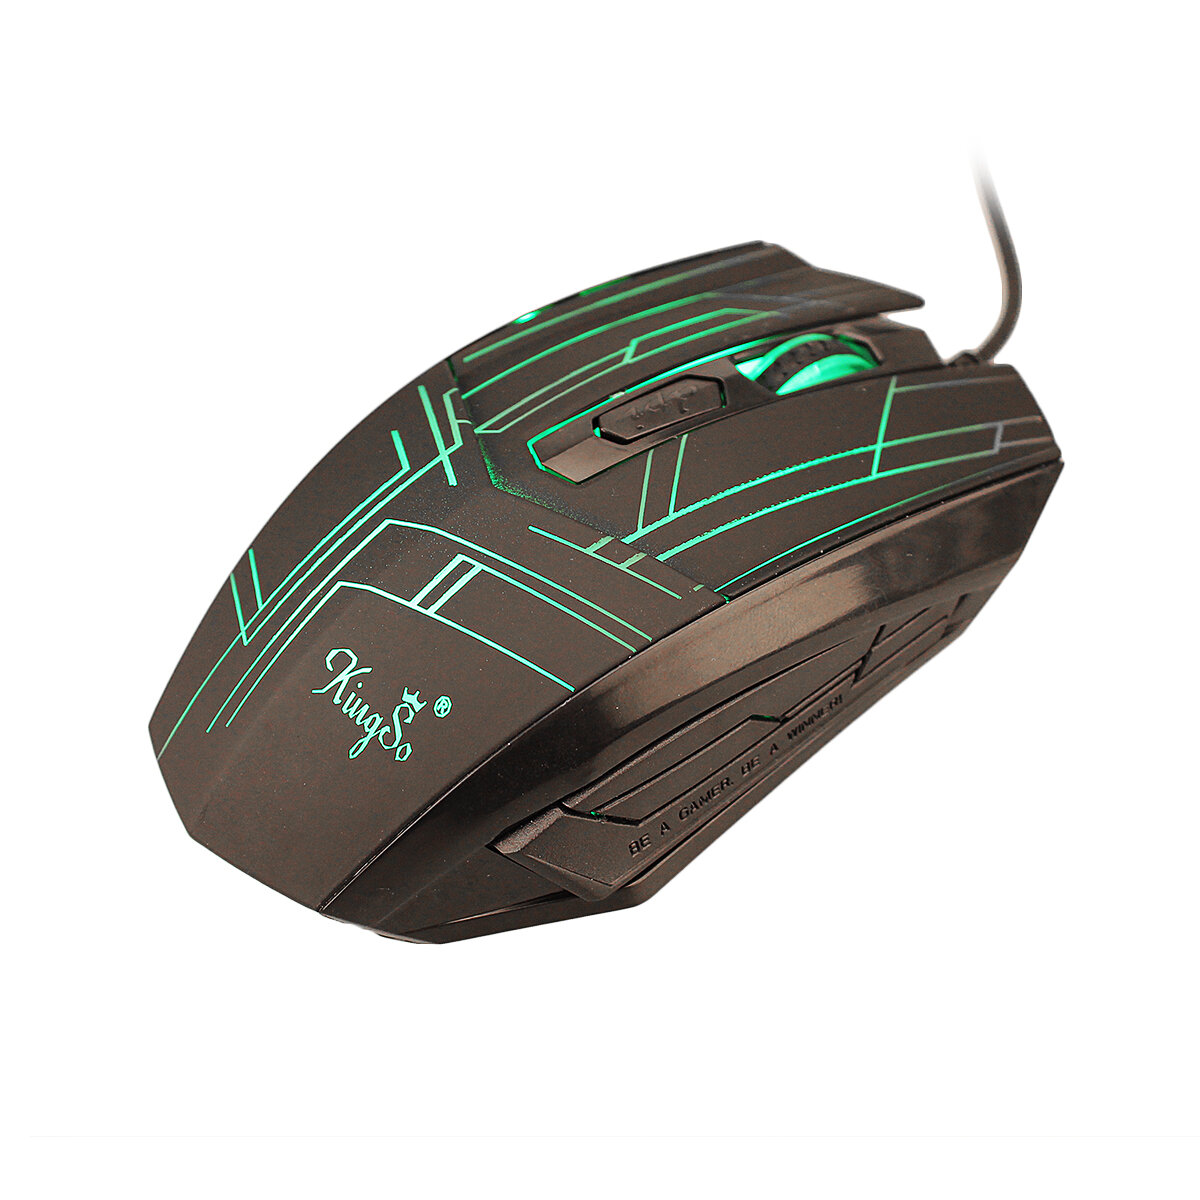 ELEGIANT T5 Wired Gaming Mouse 2400DPI LED Backlight USB Wired Optical Mouse Computer Mice for Home 